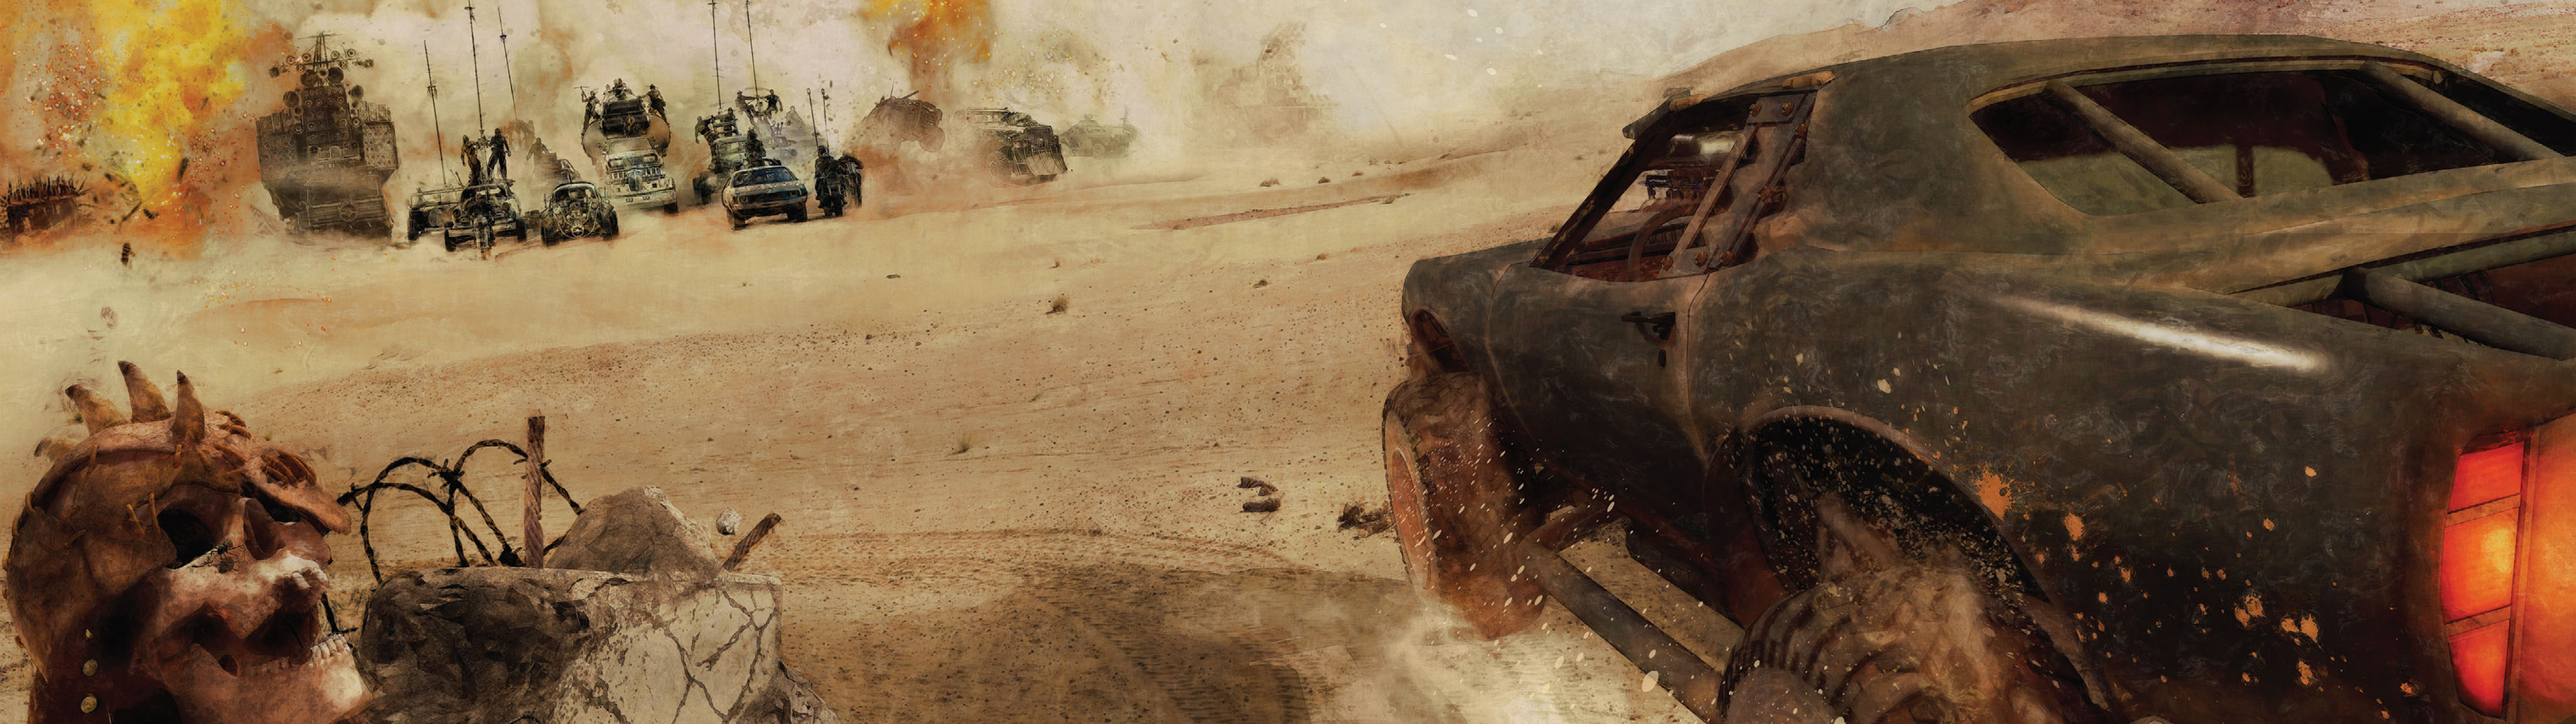 Mad Max Fury Road Hd Wallpaper Background Image 3840x1080 Id Wallpaper Abyss